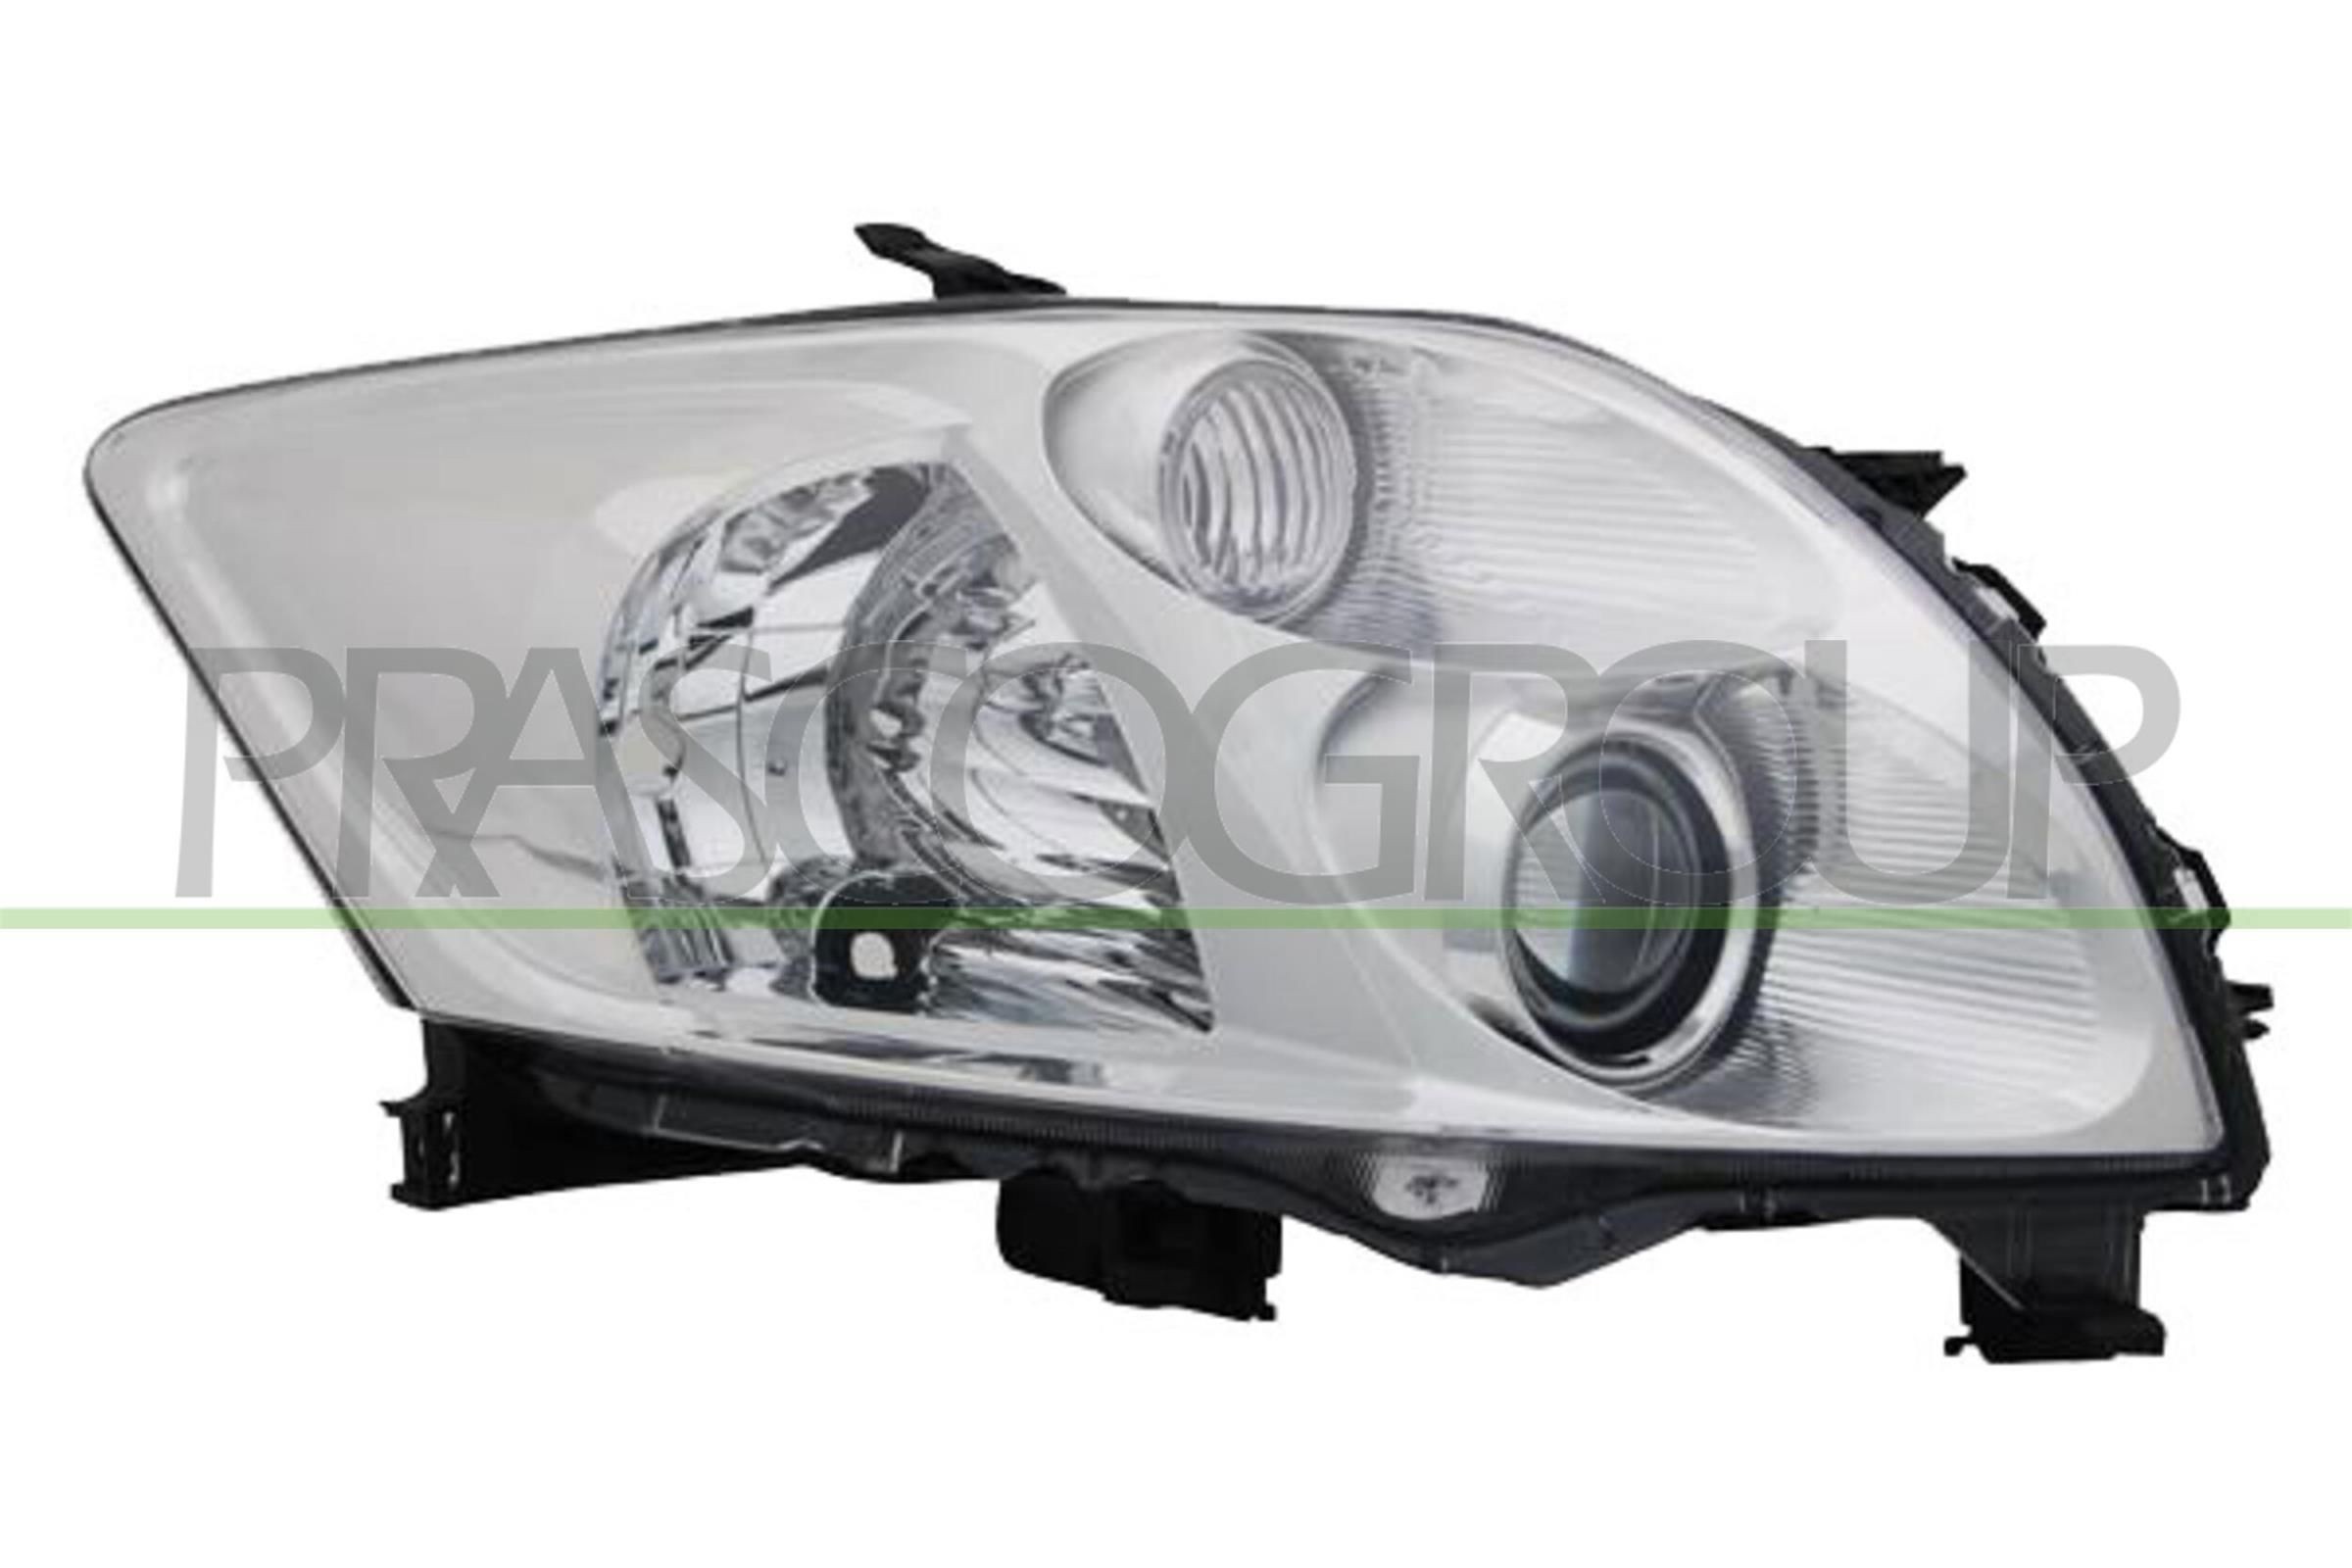 TY3504913 PRASCO Headlight TOYOTA Right, H11, HB3, without motor for headlamp levelling